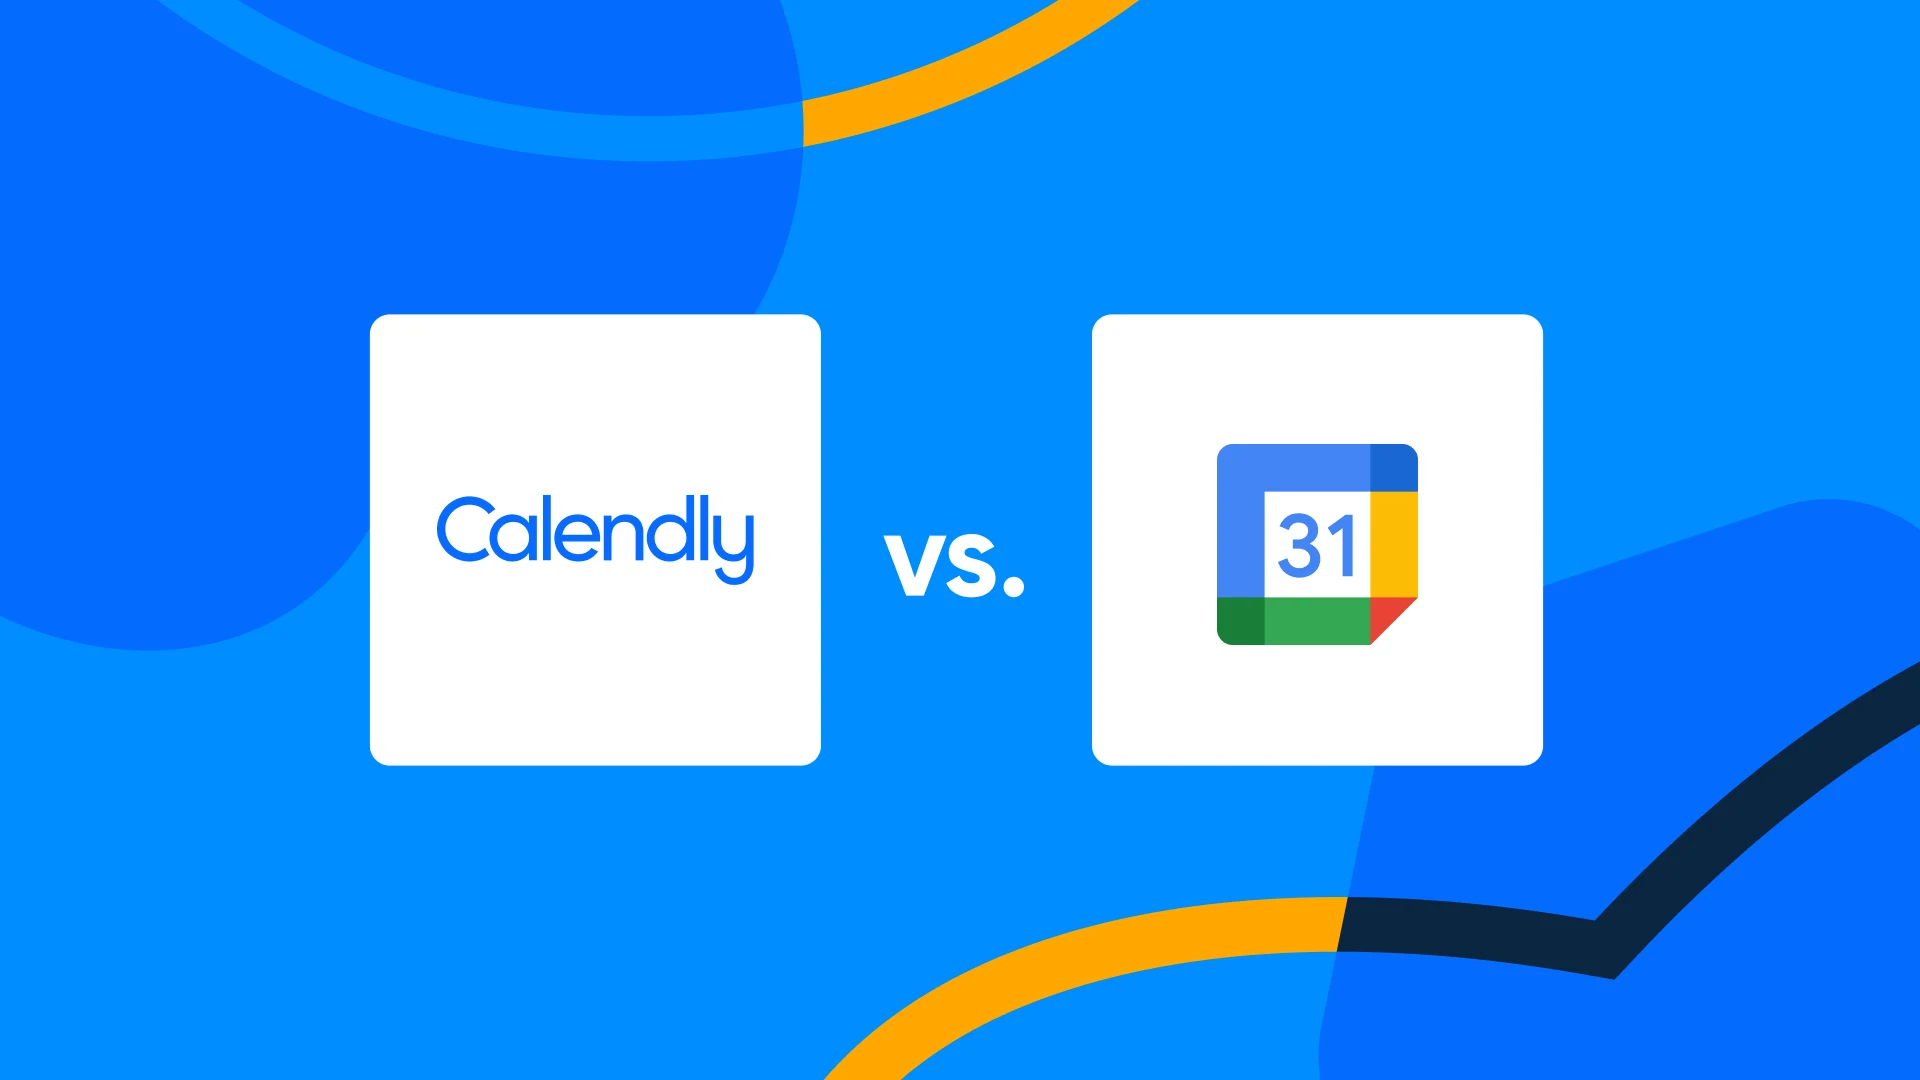 Calendly vs Google Calendar Appointment Scheduling: Which is better